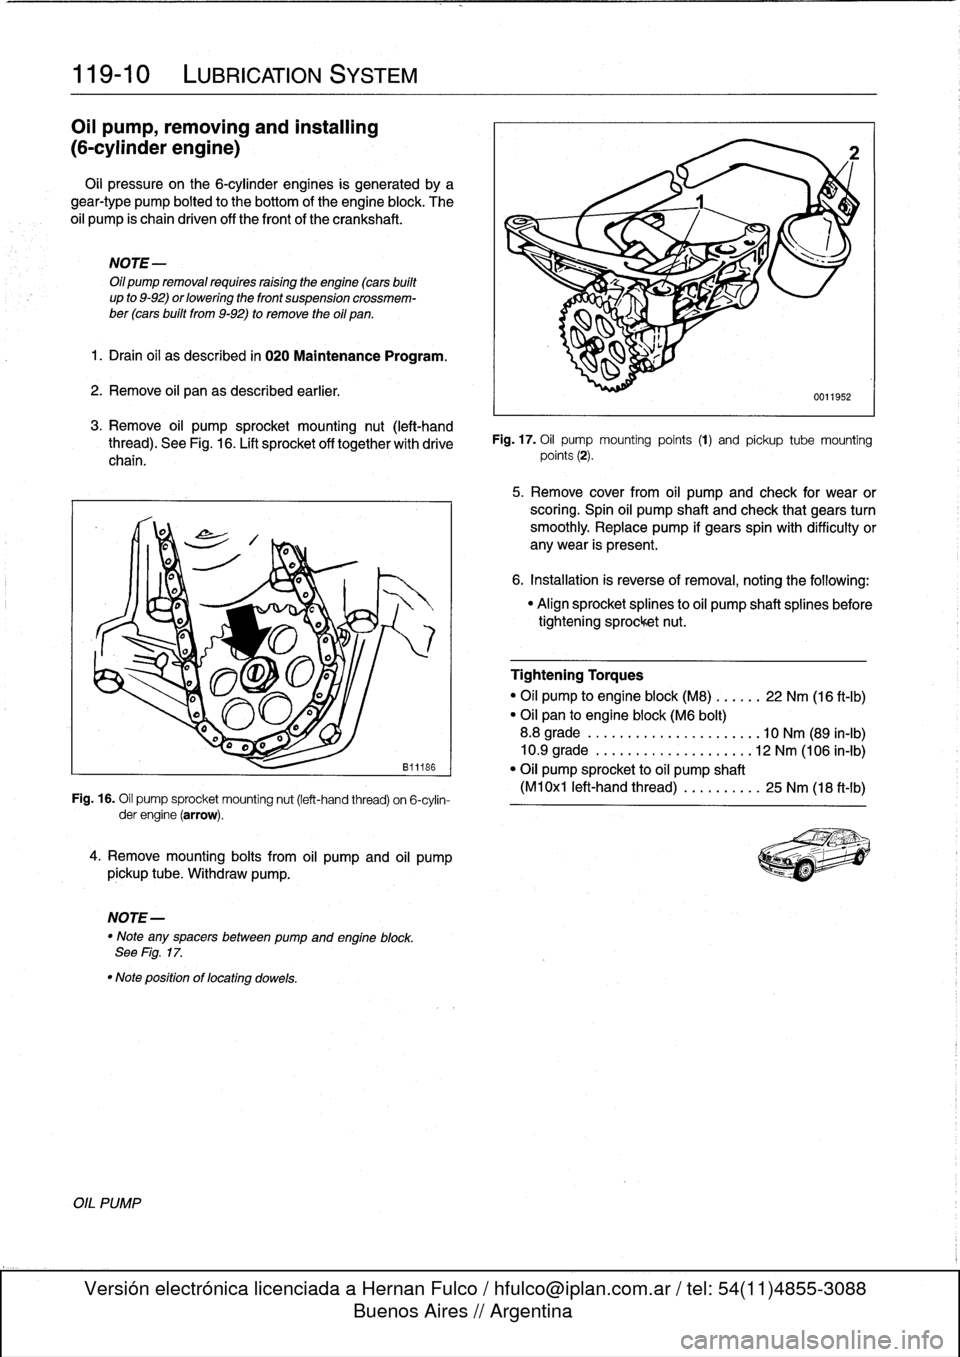 BMW 318i 1998 E36 User Guide 
119-
1
0

	

LUBRICATION
SYSTEM

Oil
pump,
removing
and
installing

(6-cylinder
engine)

Oil
pressure
on
the
6-cylinder
engines
is
generated
by
a
gear-type
pump
bolted
to
the
bottom
of
the
engine
blo